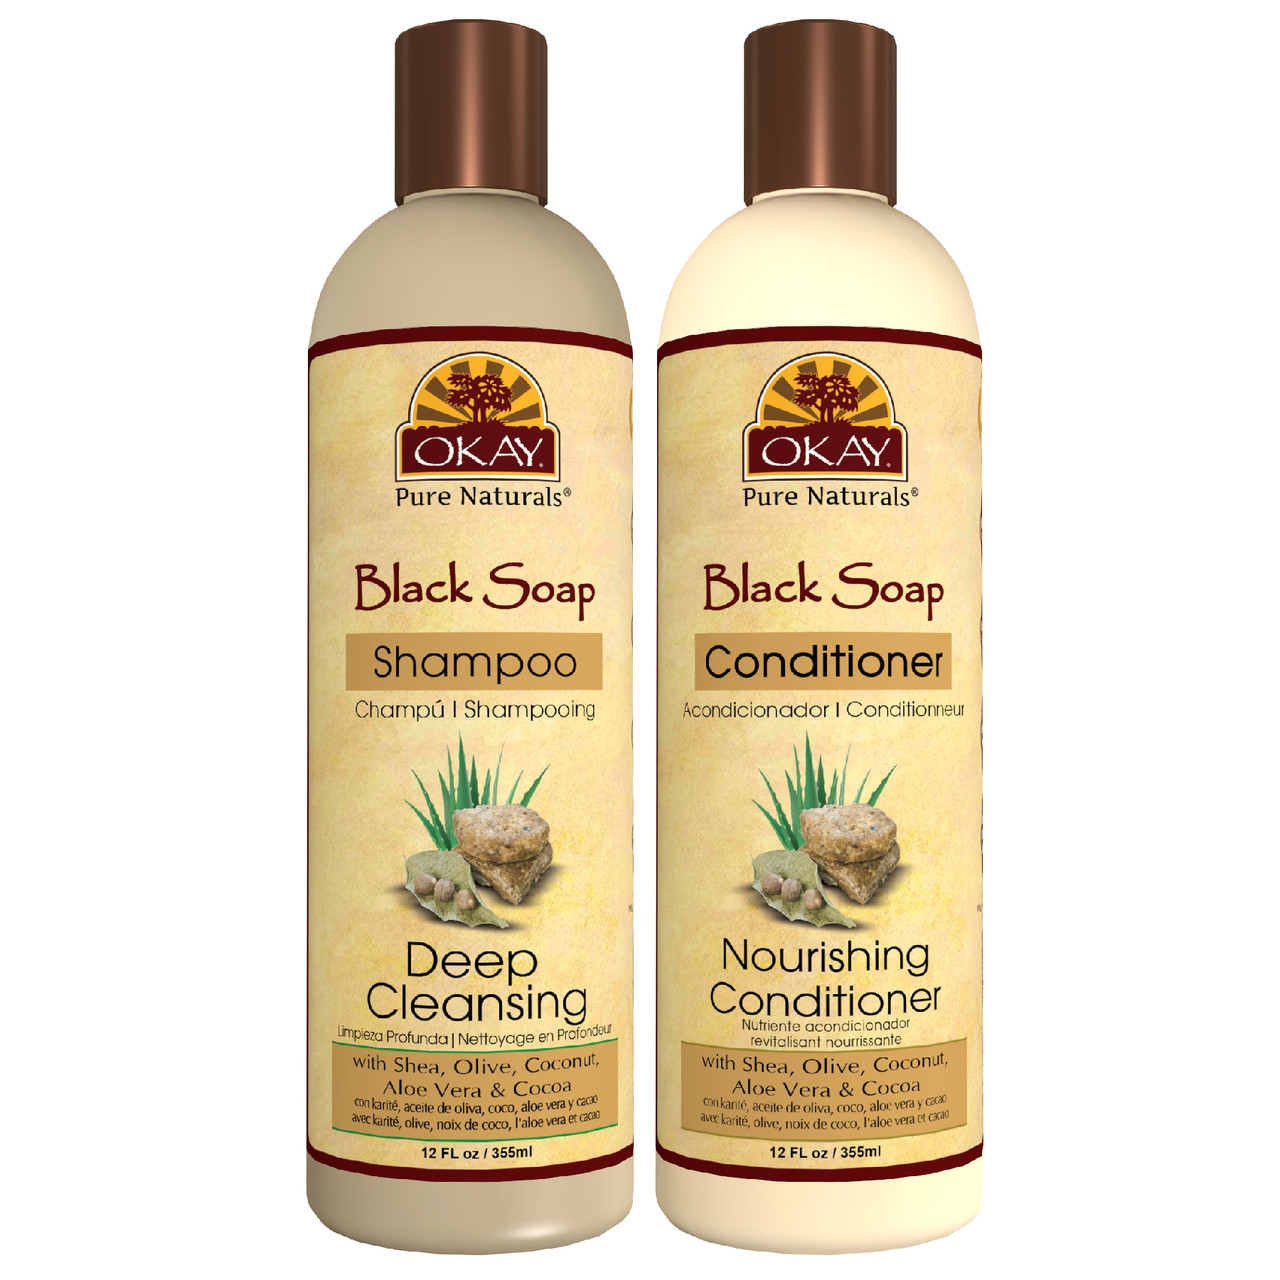 Okay Shampoo Conditioner Black Soap Hair Care Set Deep Cleansing Helps Cleanse Nourish And Hydrate Hair Sulfate Silicone Paraben Free For All Hair Types Set Of 2 X 12oz Okaypurenaturals Com